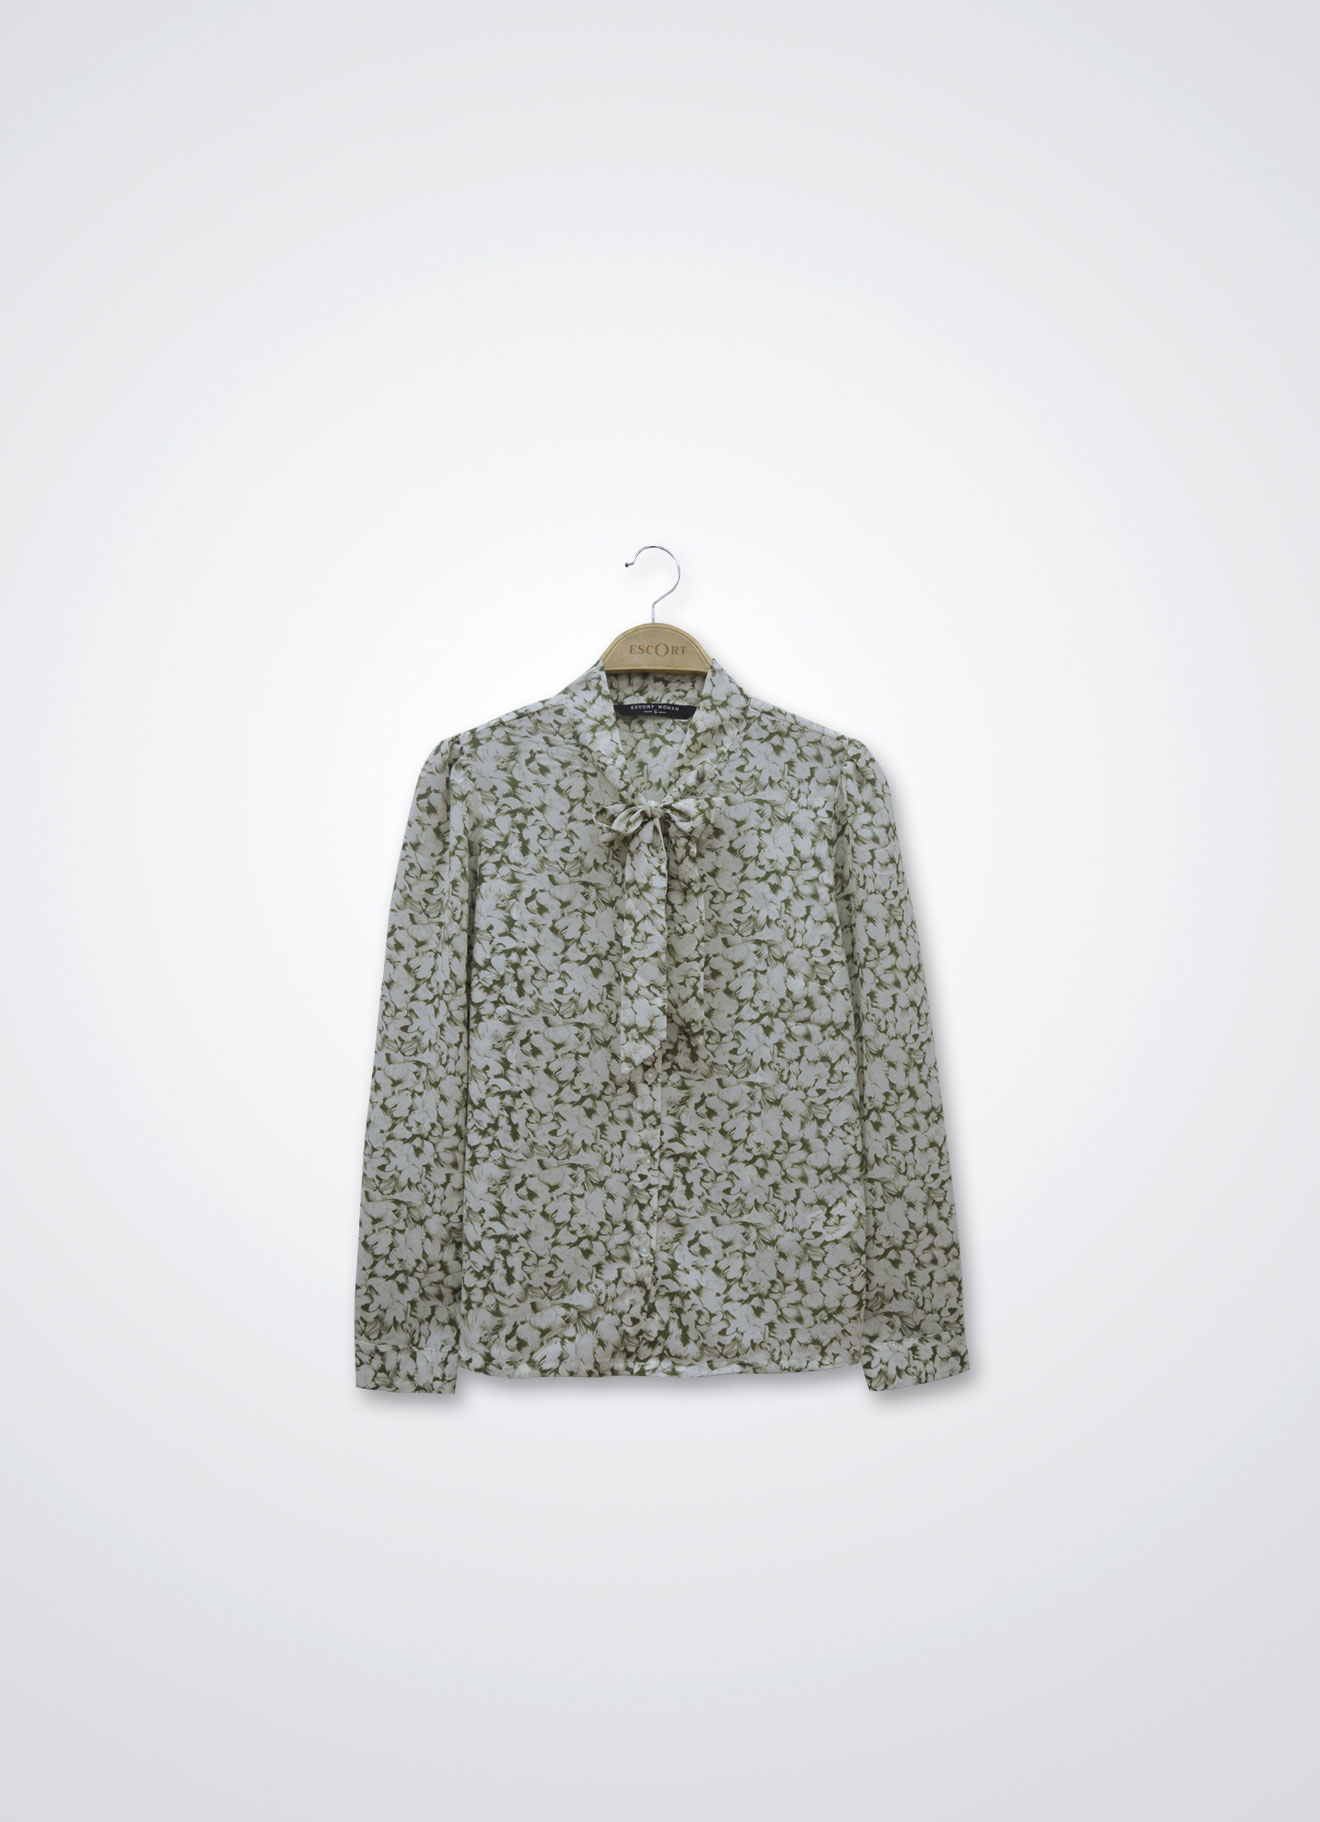 Olive-Branch by Floral Printed Blouse